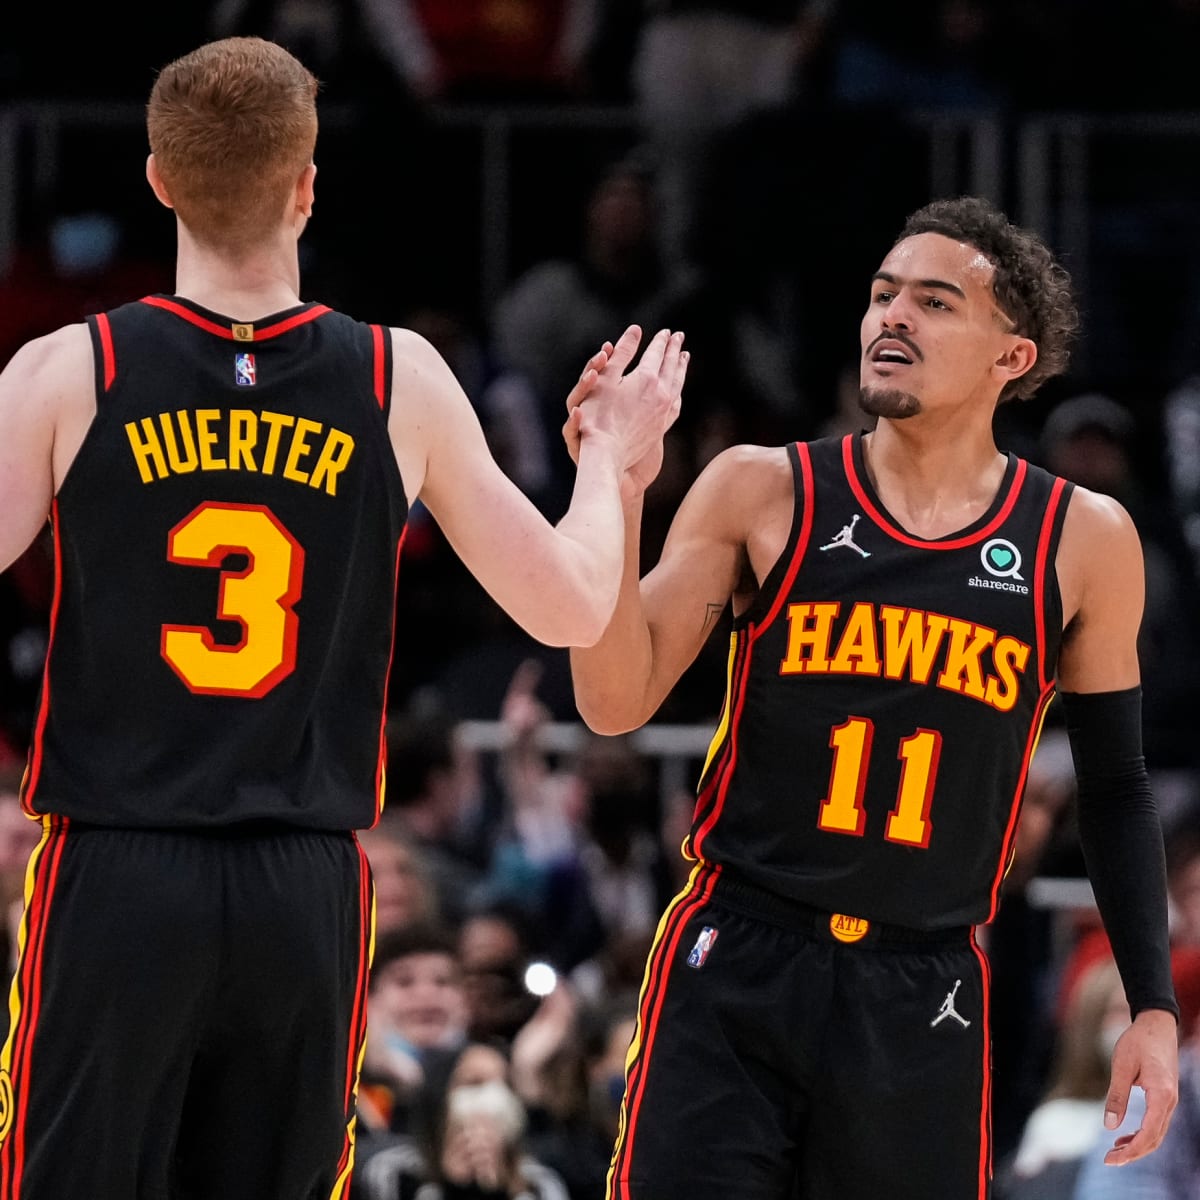 Gifdsports on X: Hawks Kevin Huerter wears #3 because he grew up